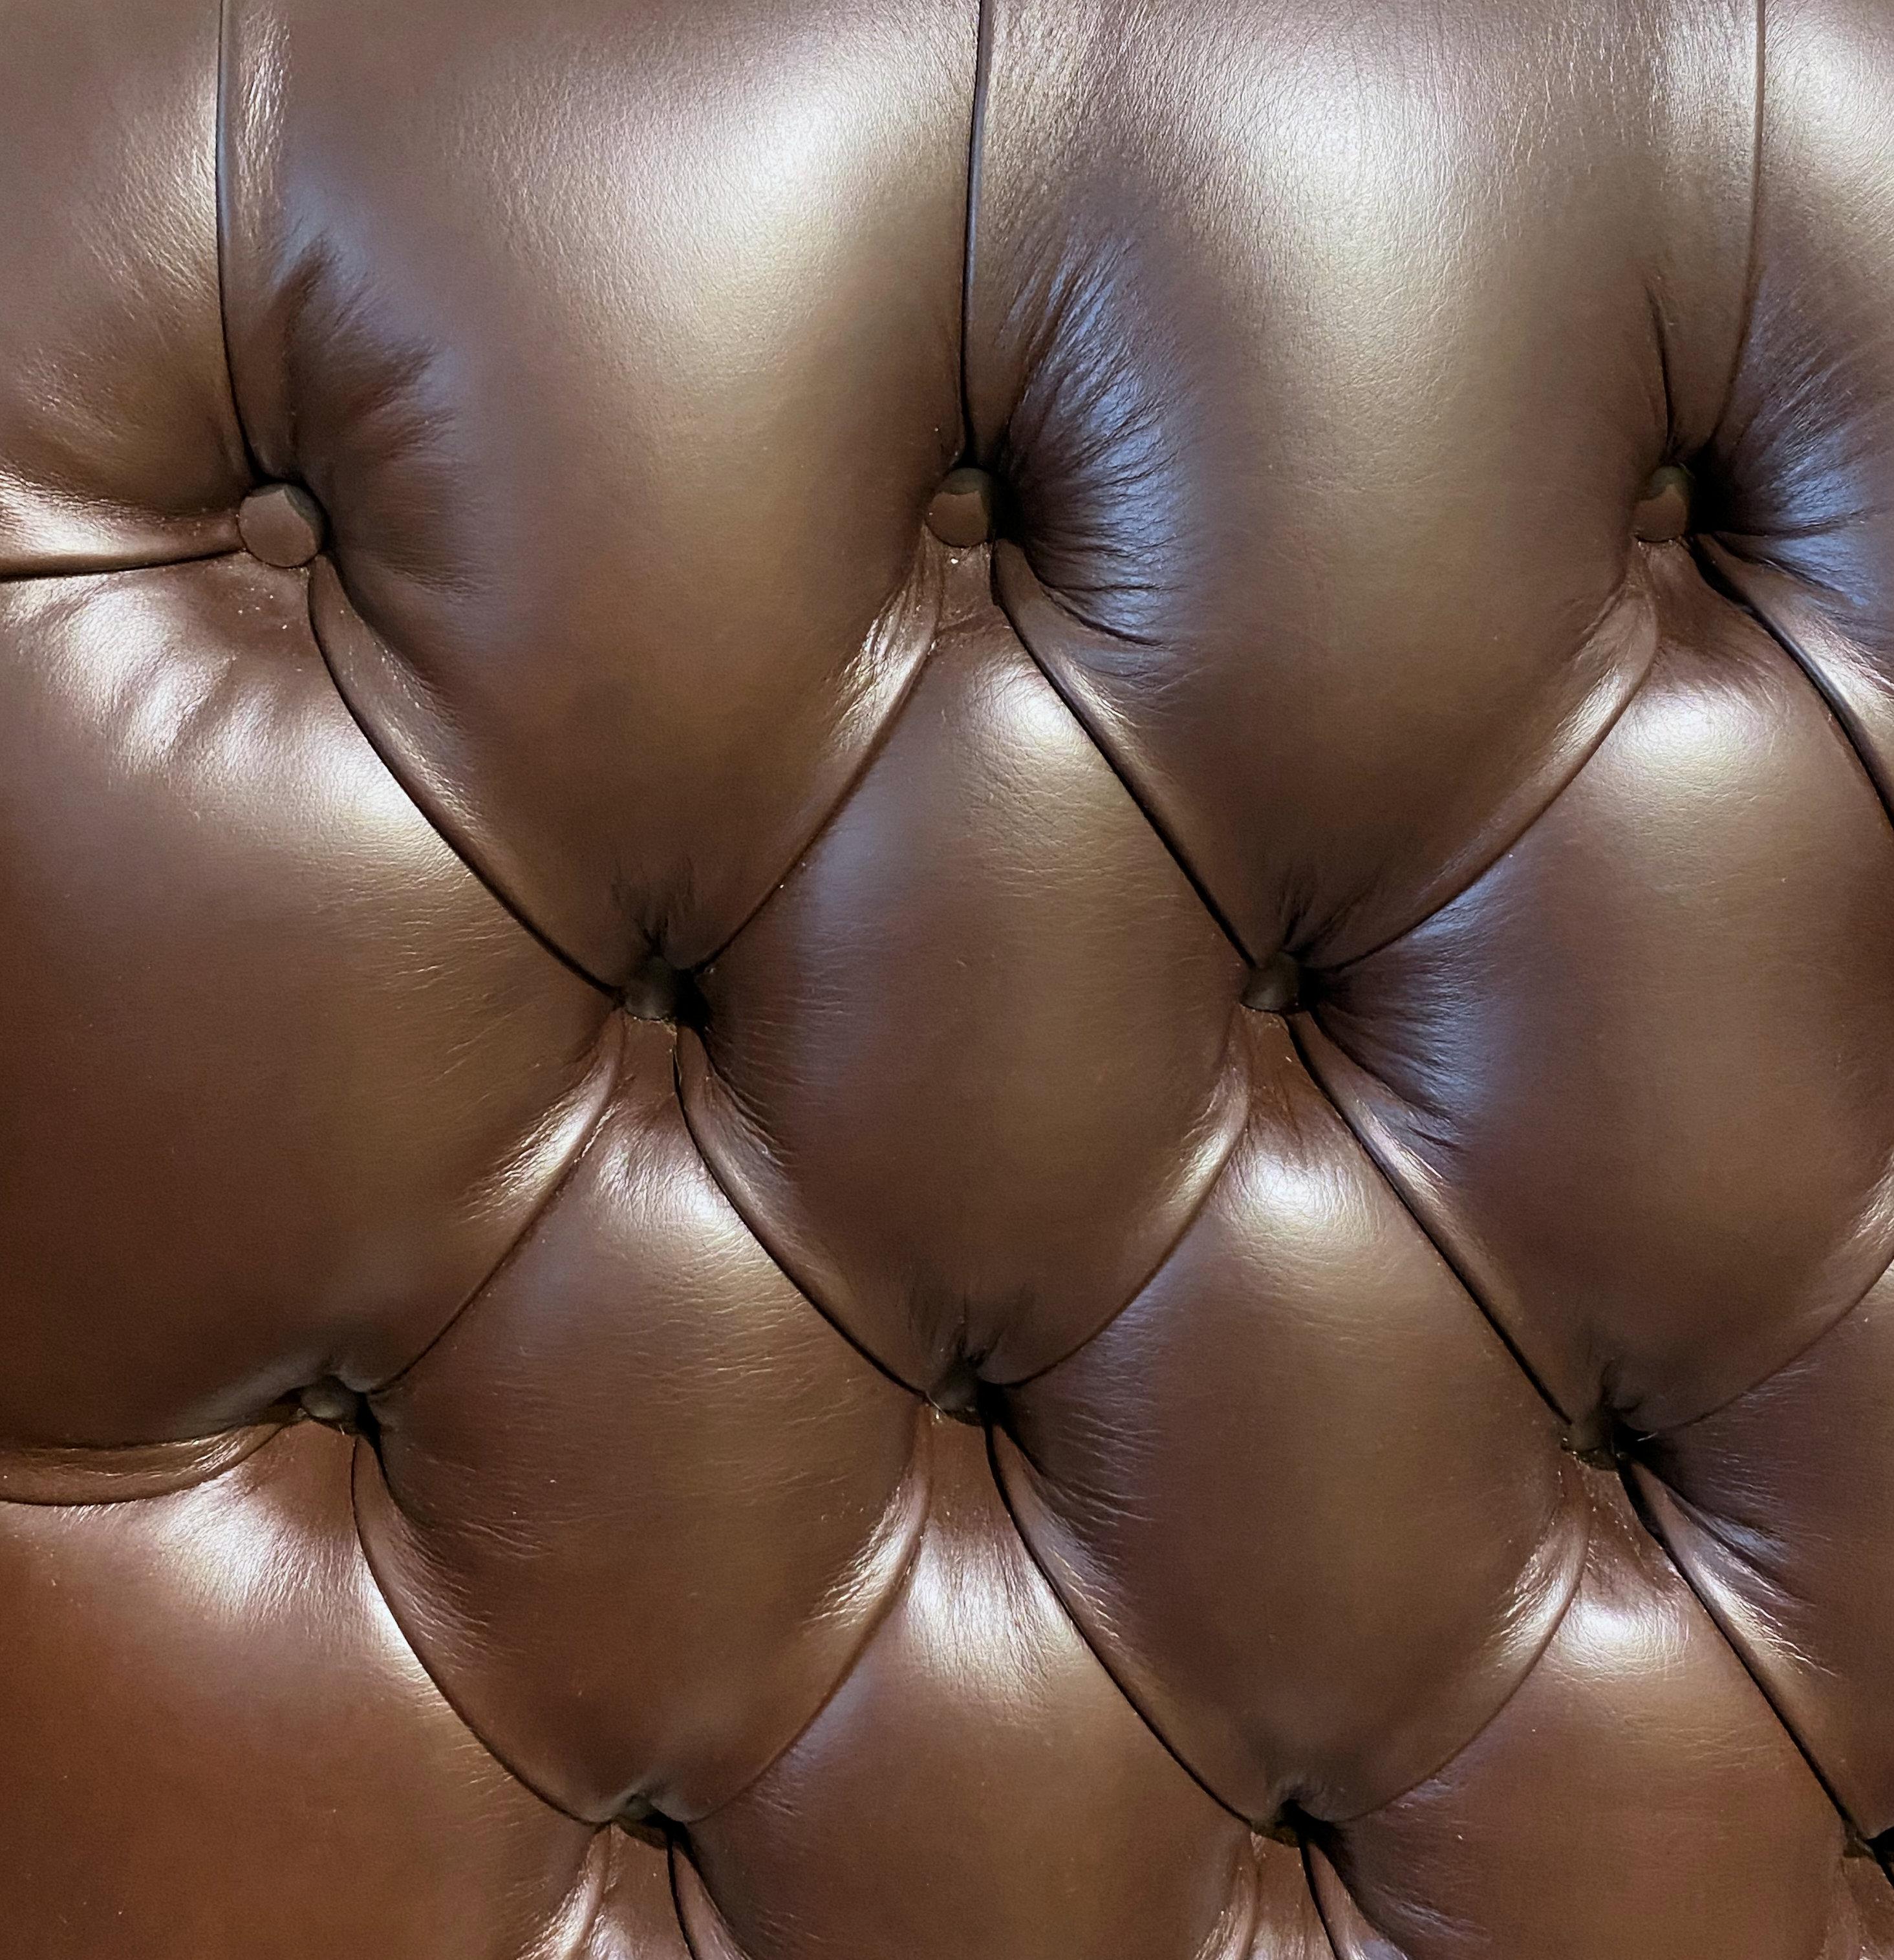 leather chairs for sale